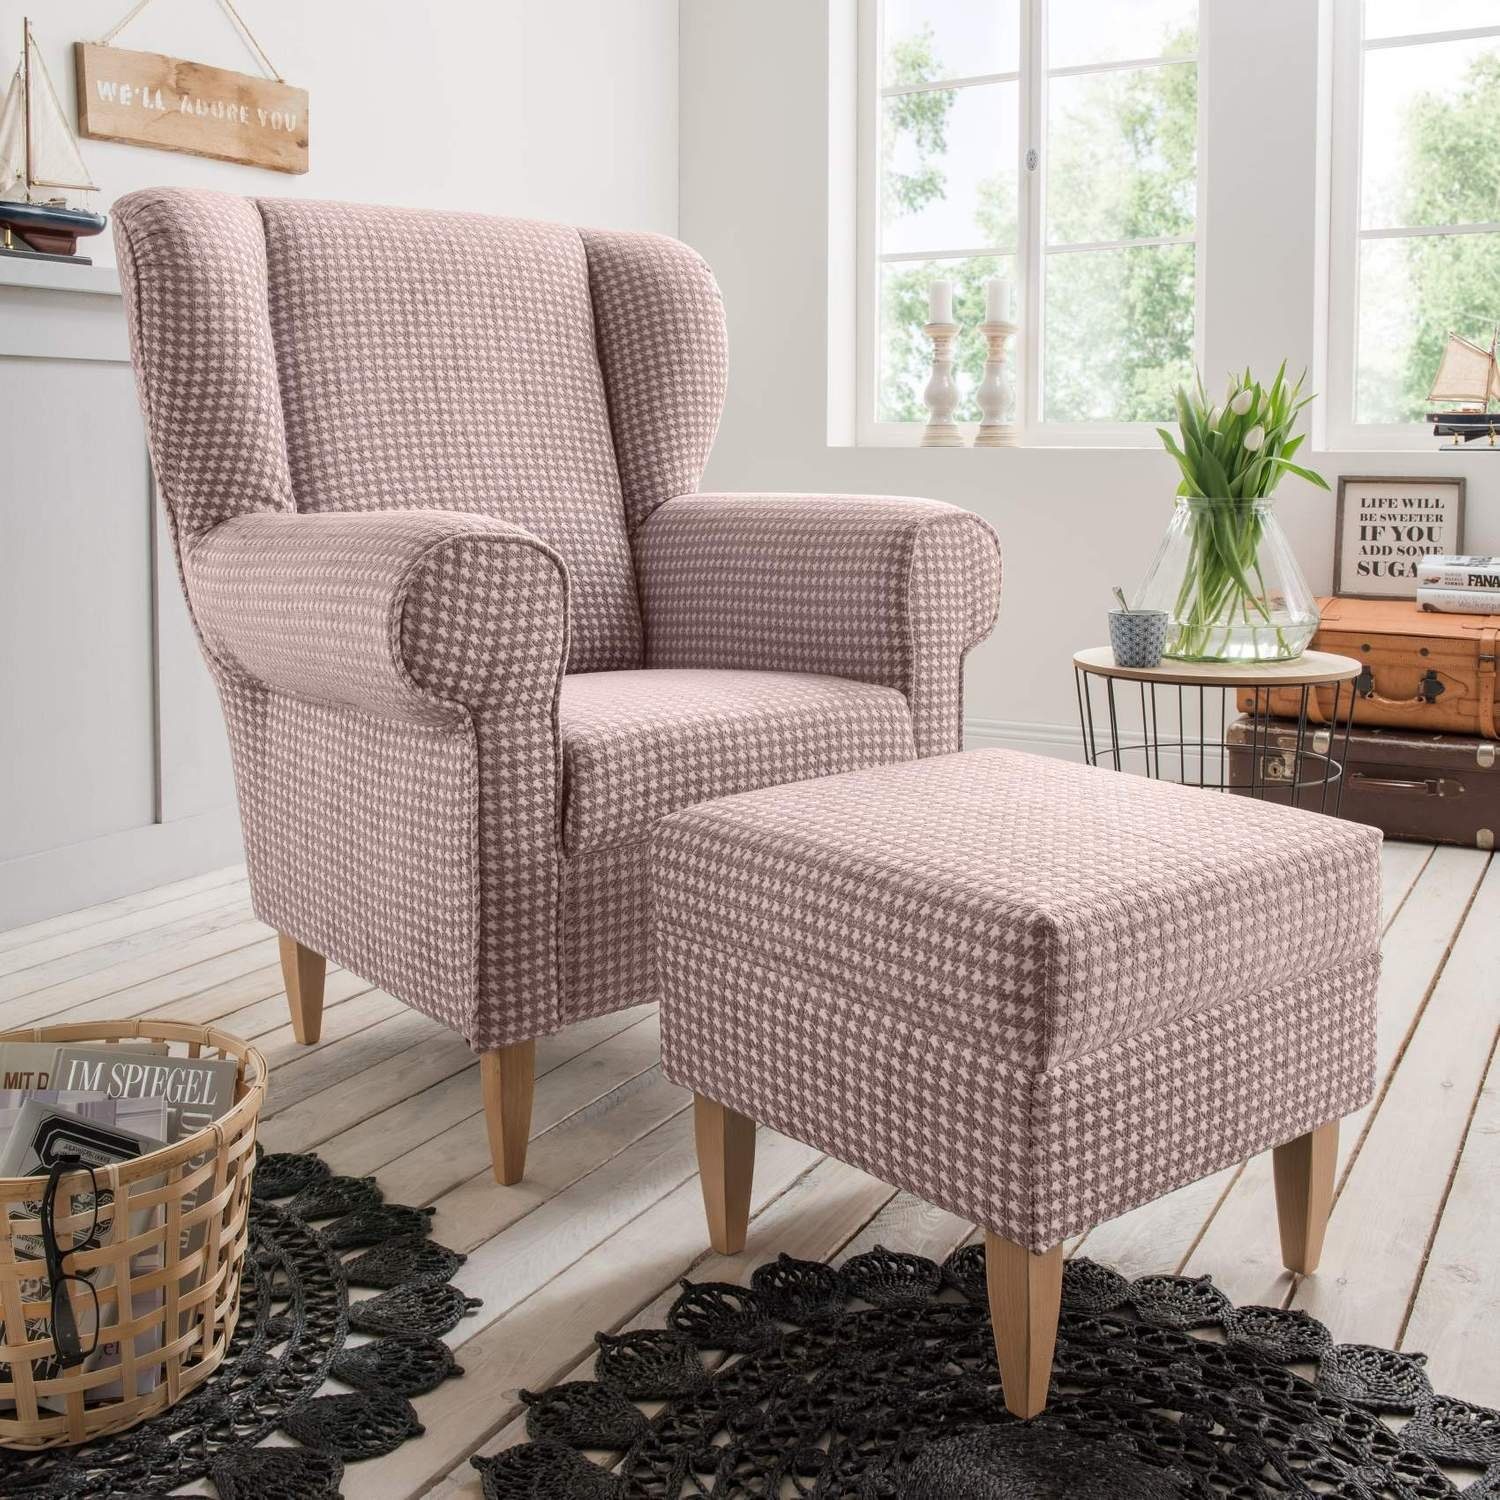 BENFORMATO Talento Loungesessel HOME Flamingo COLLECTION Ohrensessel Stoff Polstersessel AVERSA